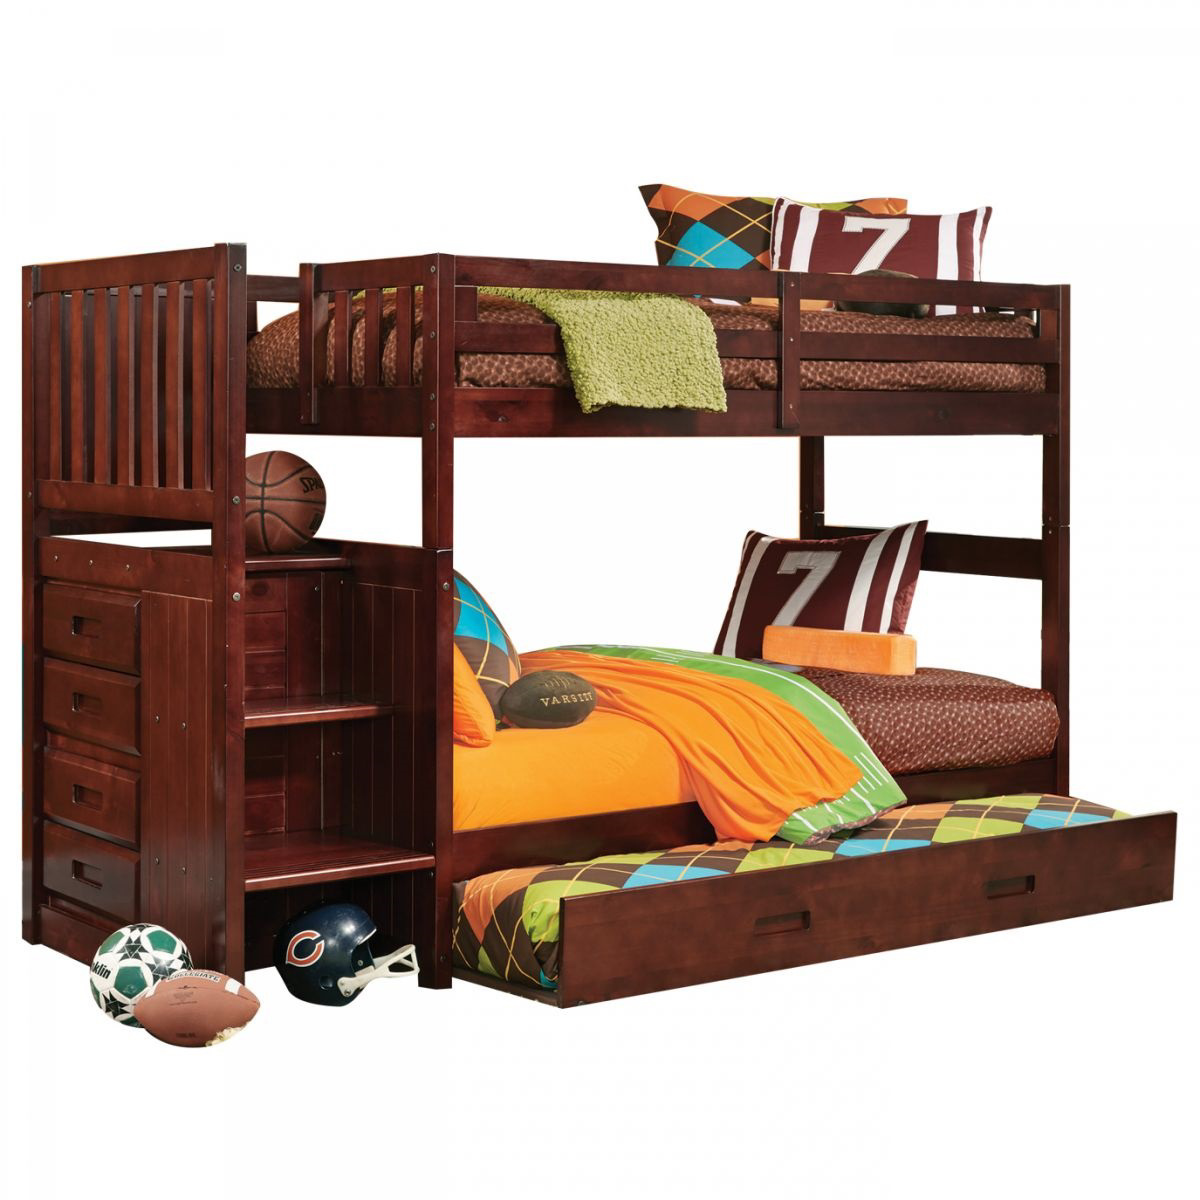 Forrester Twin Staircase Bunk Bed, Twin Bunk Beds With Storage Stairs